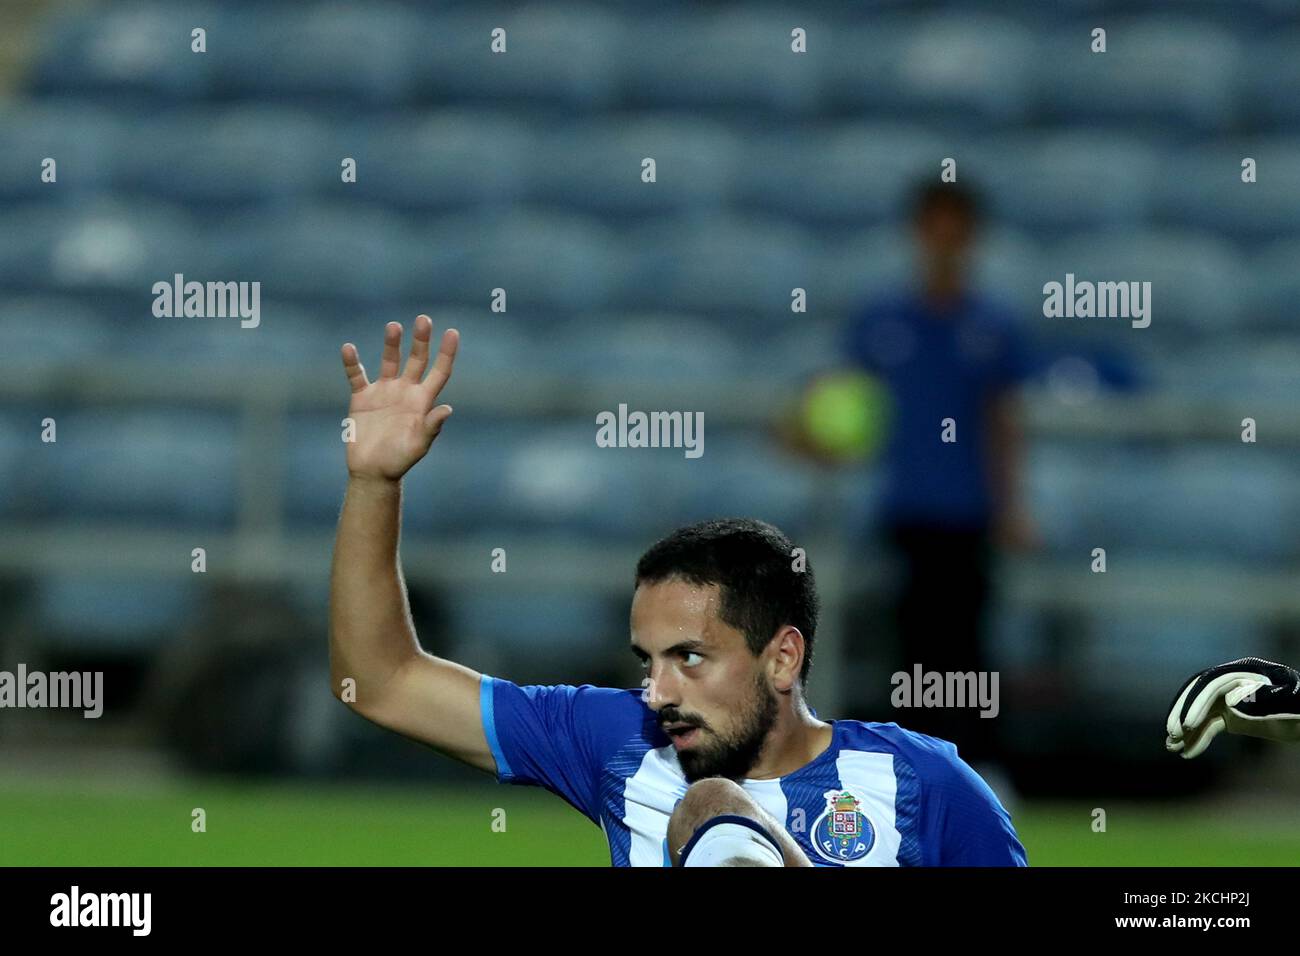 Bruno Costa of FC Porto celebrates after scoring a goal during the pre-season friendly football match between FC Porto and Lille OSC at the Algarve stadium in Loule, Portugal on July 25, 2021. (Photo by Pedro FiÃºza/NurPhoto) Stock Photo